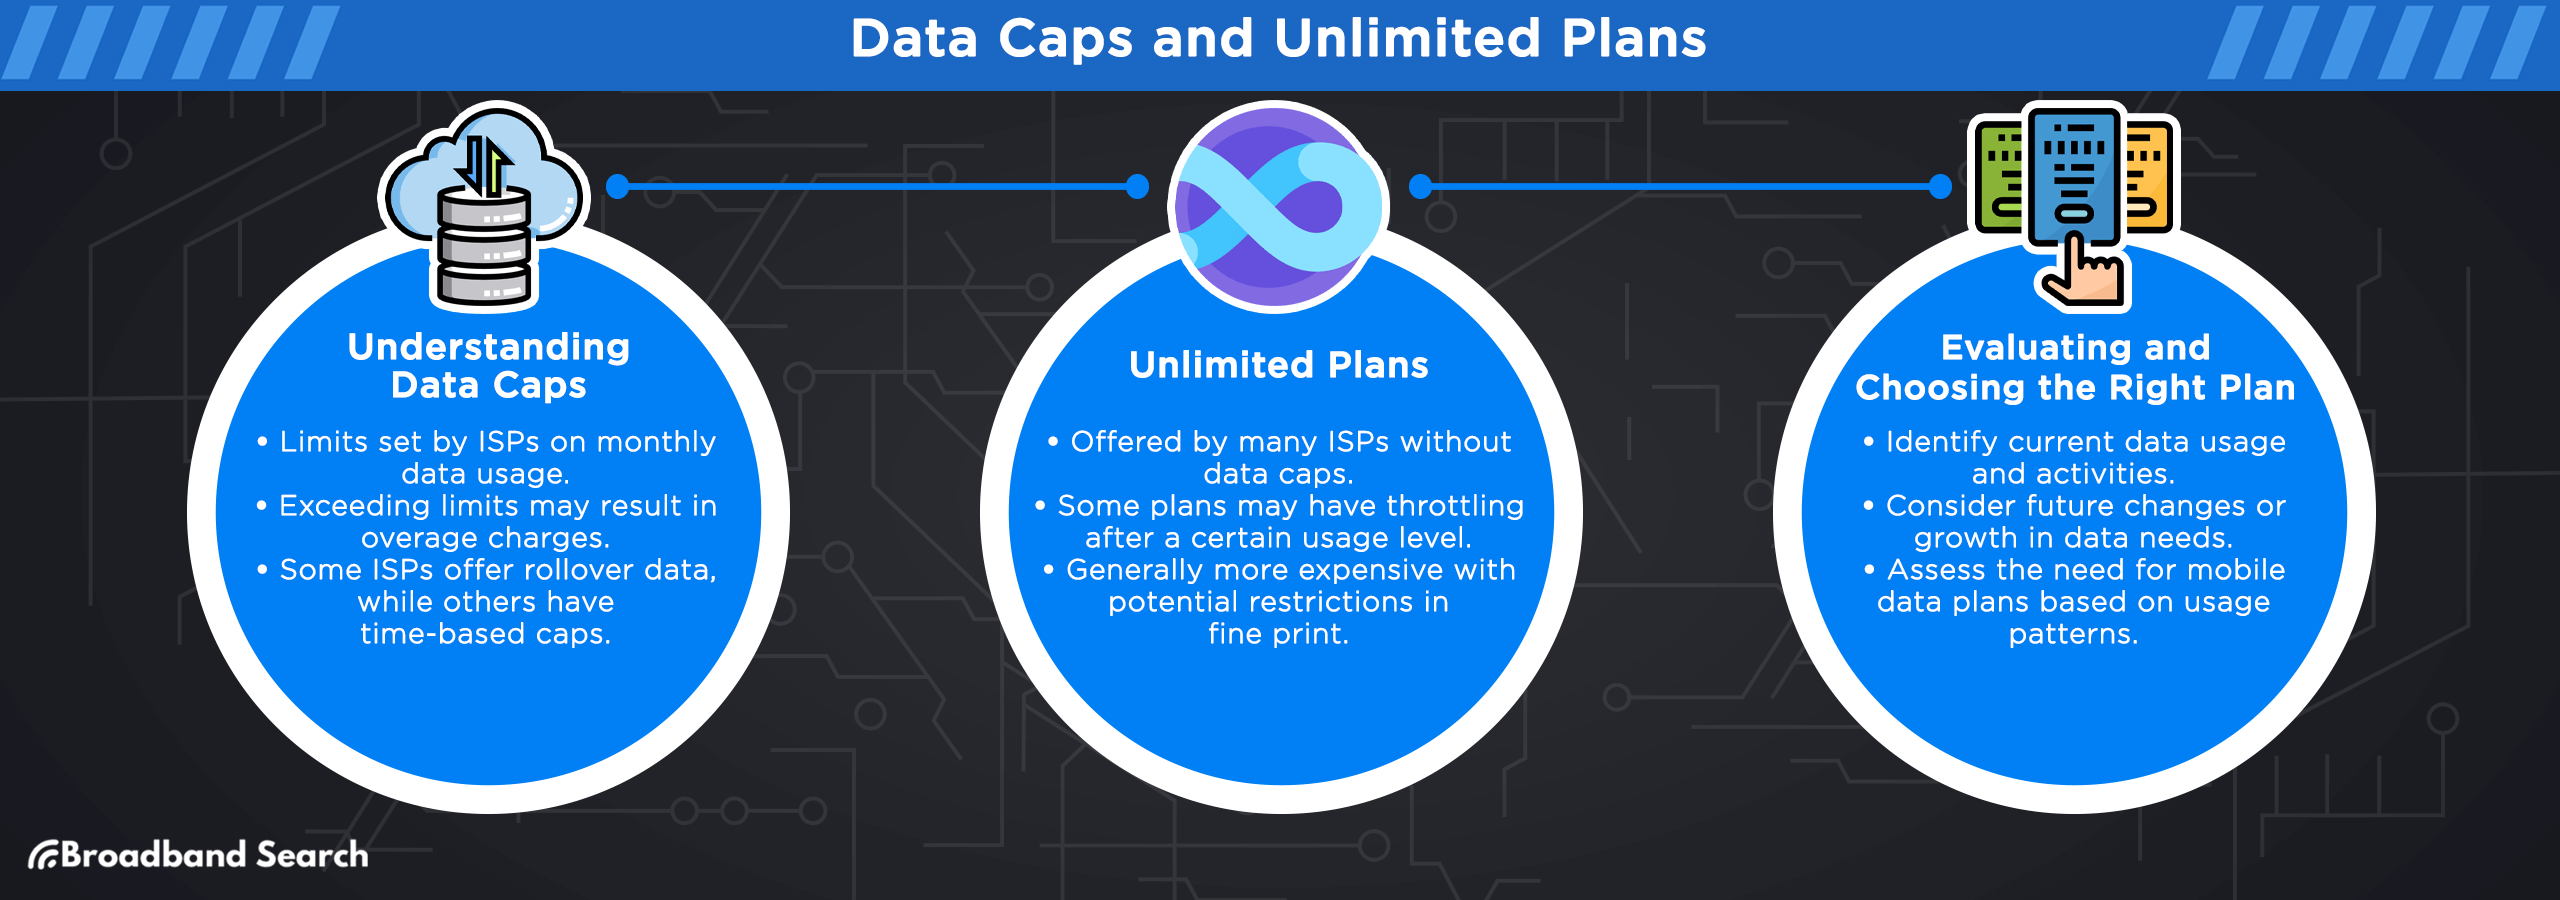 Data caps and unlimited plans